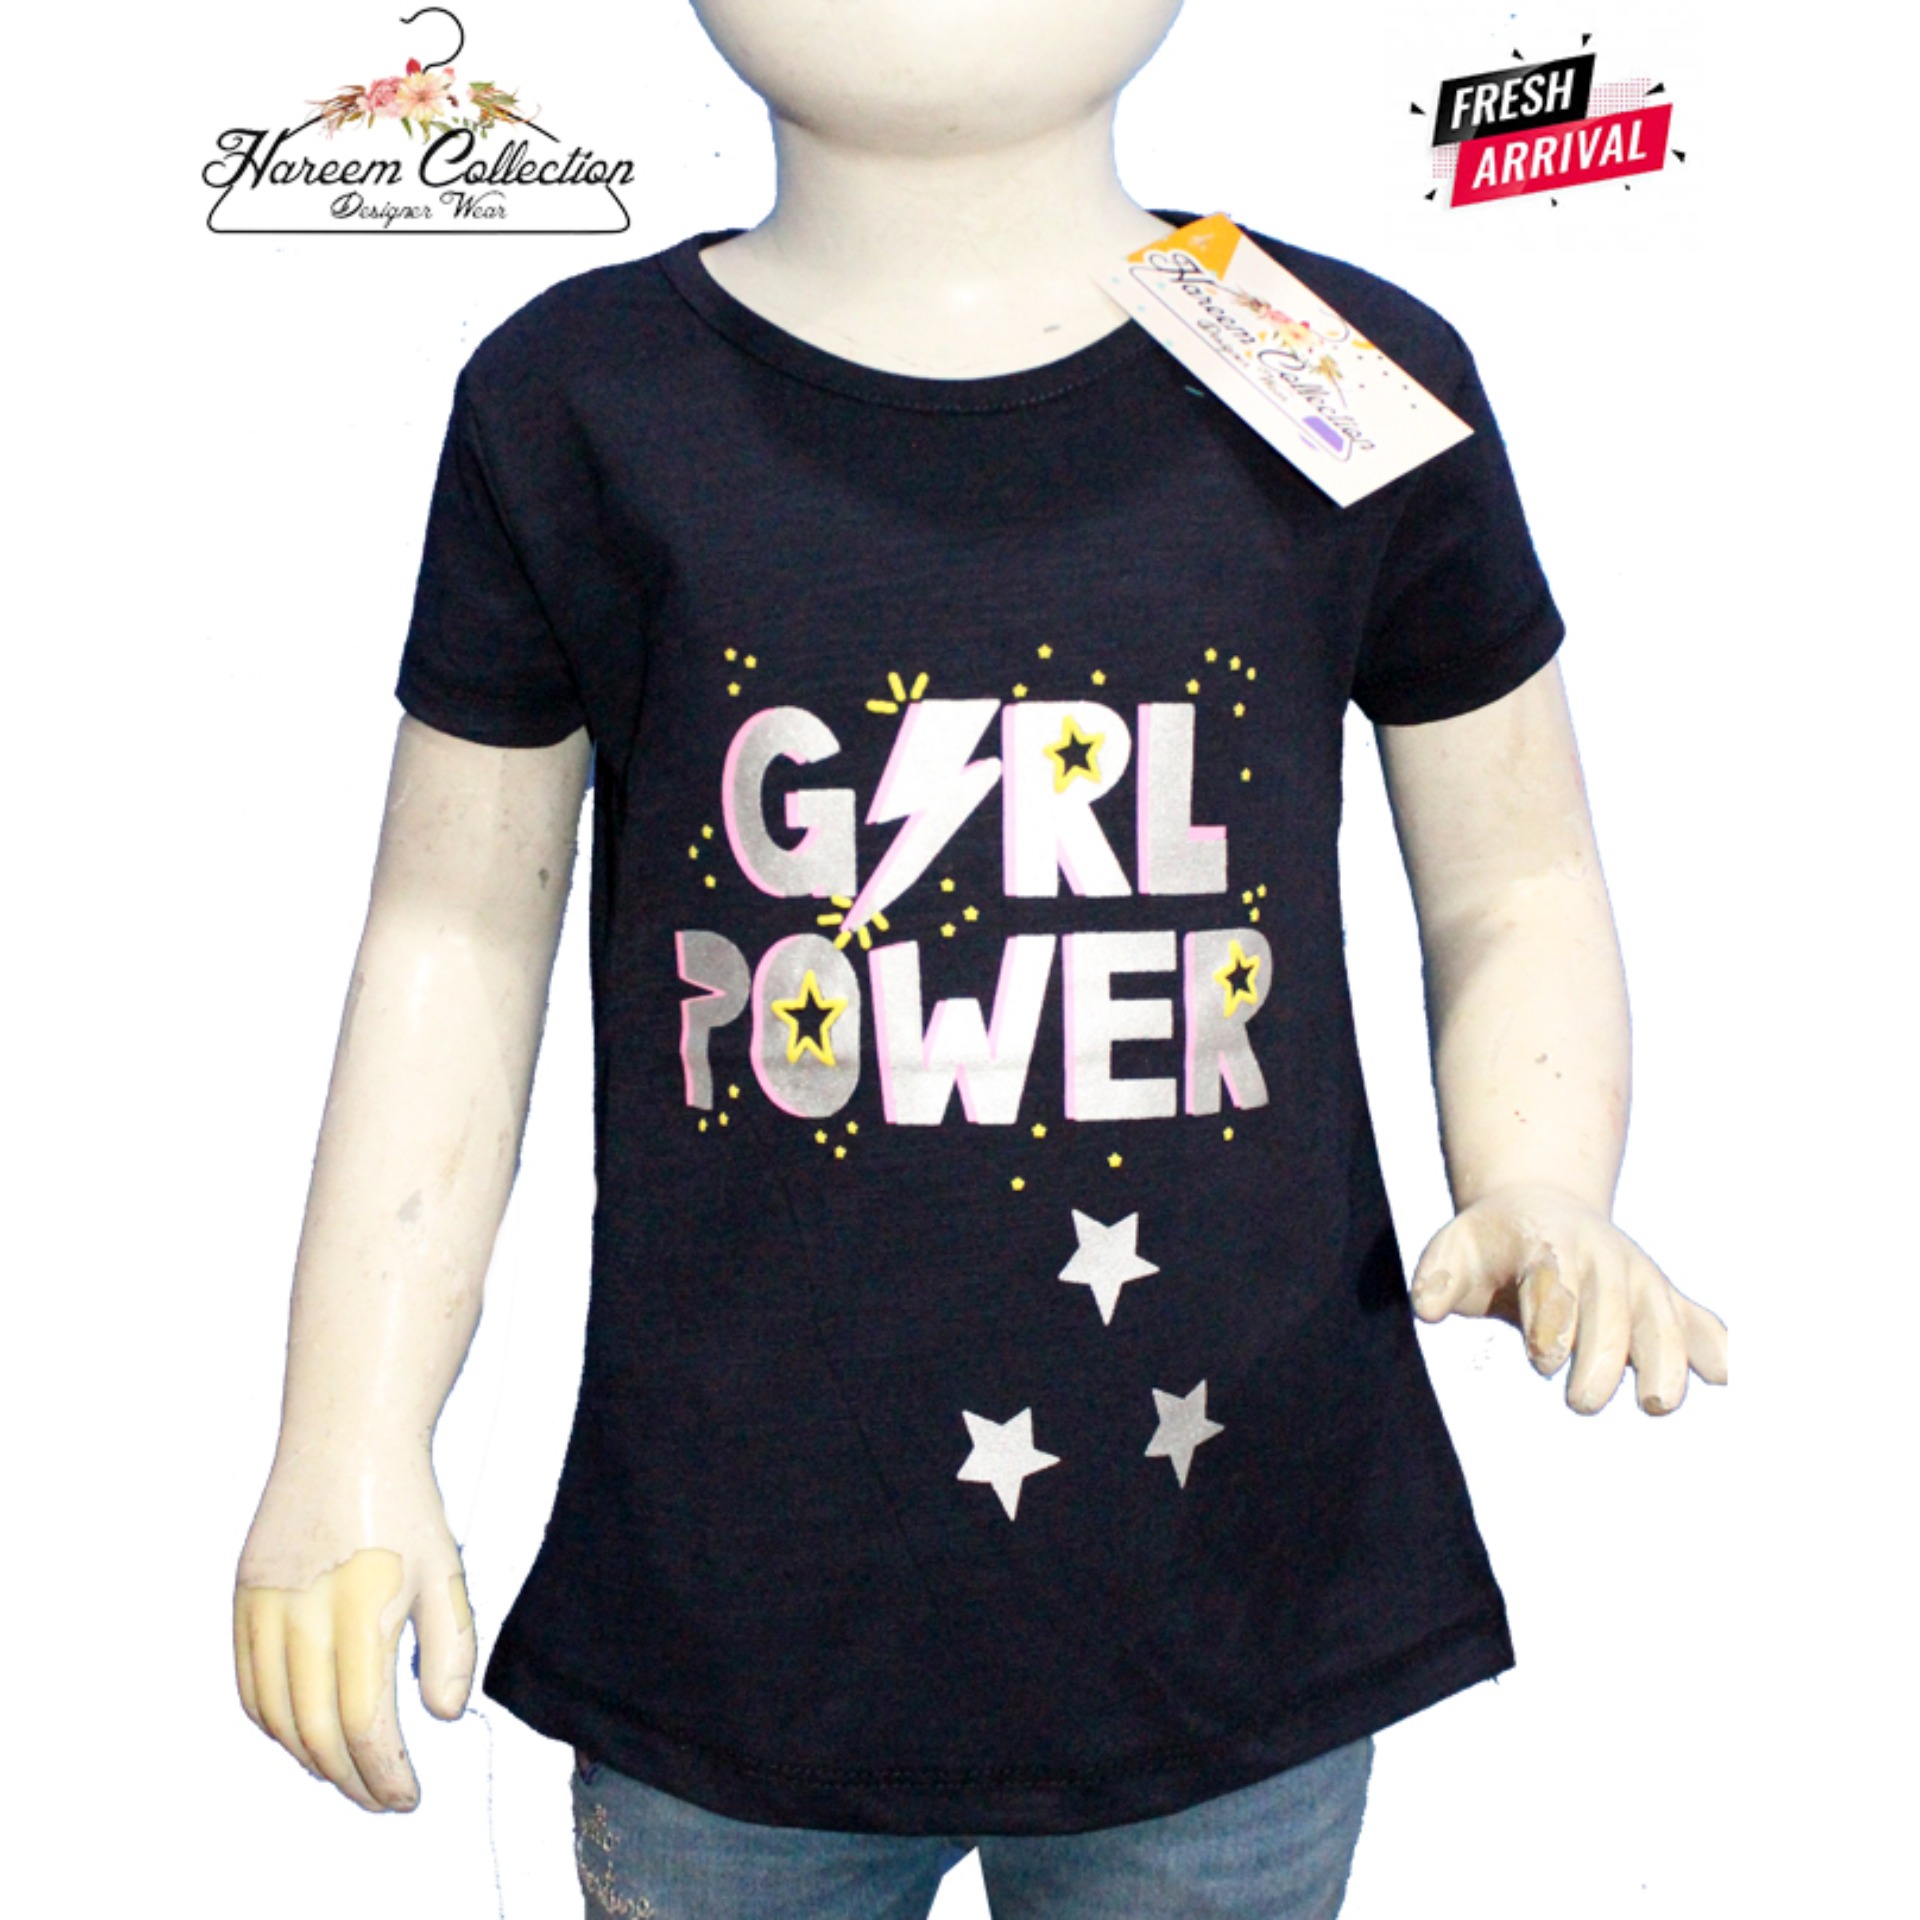 Girls Glitter Printed With Sparrow T-shirt